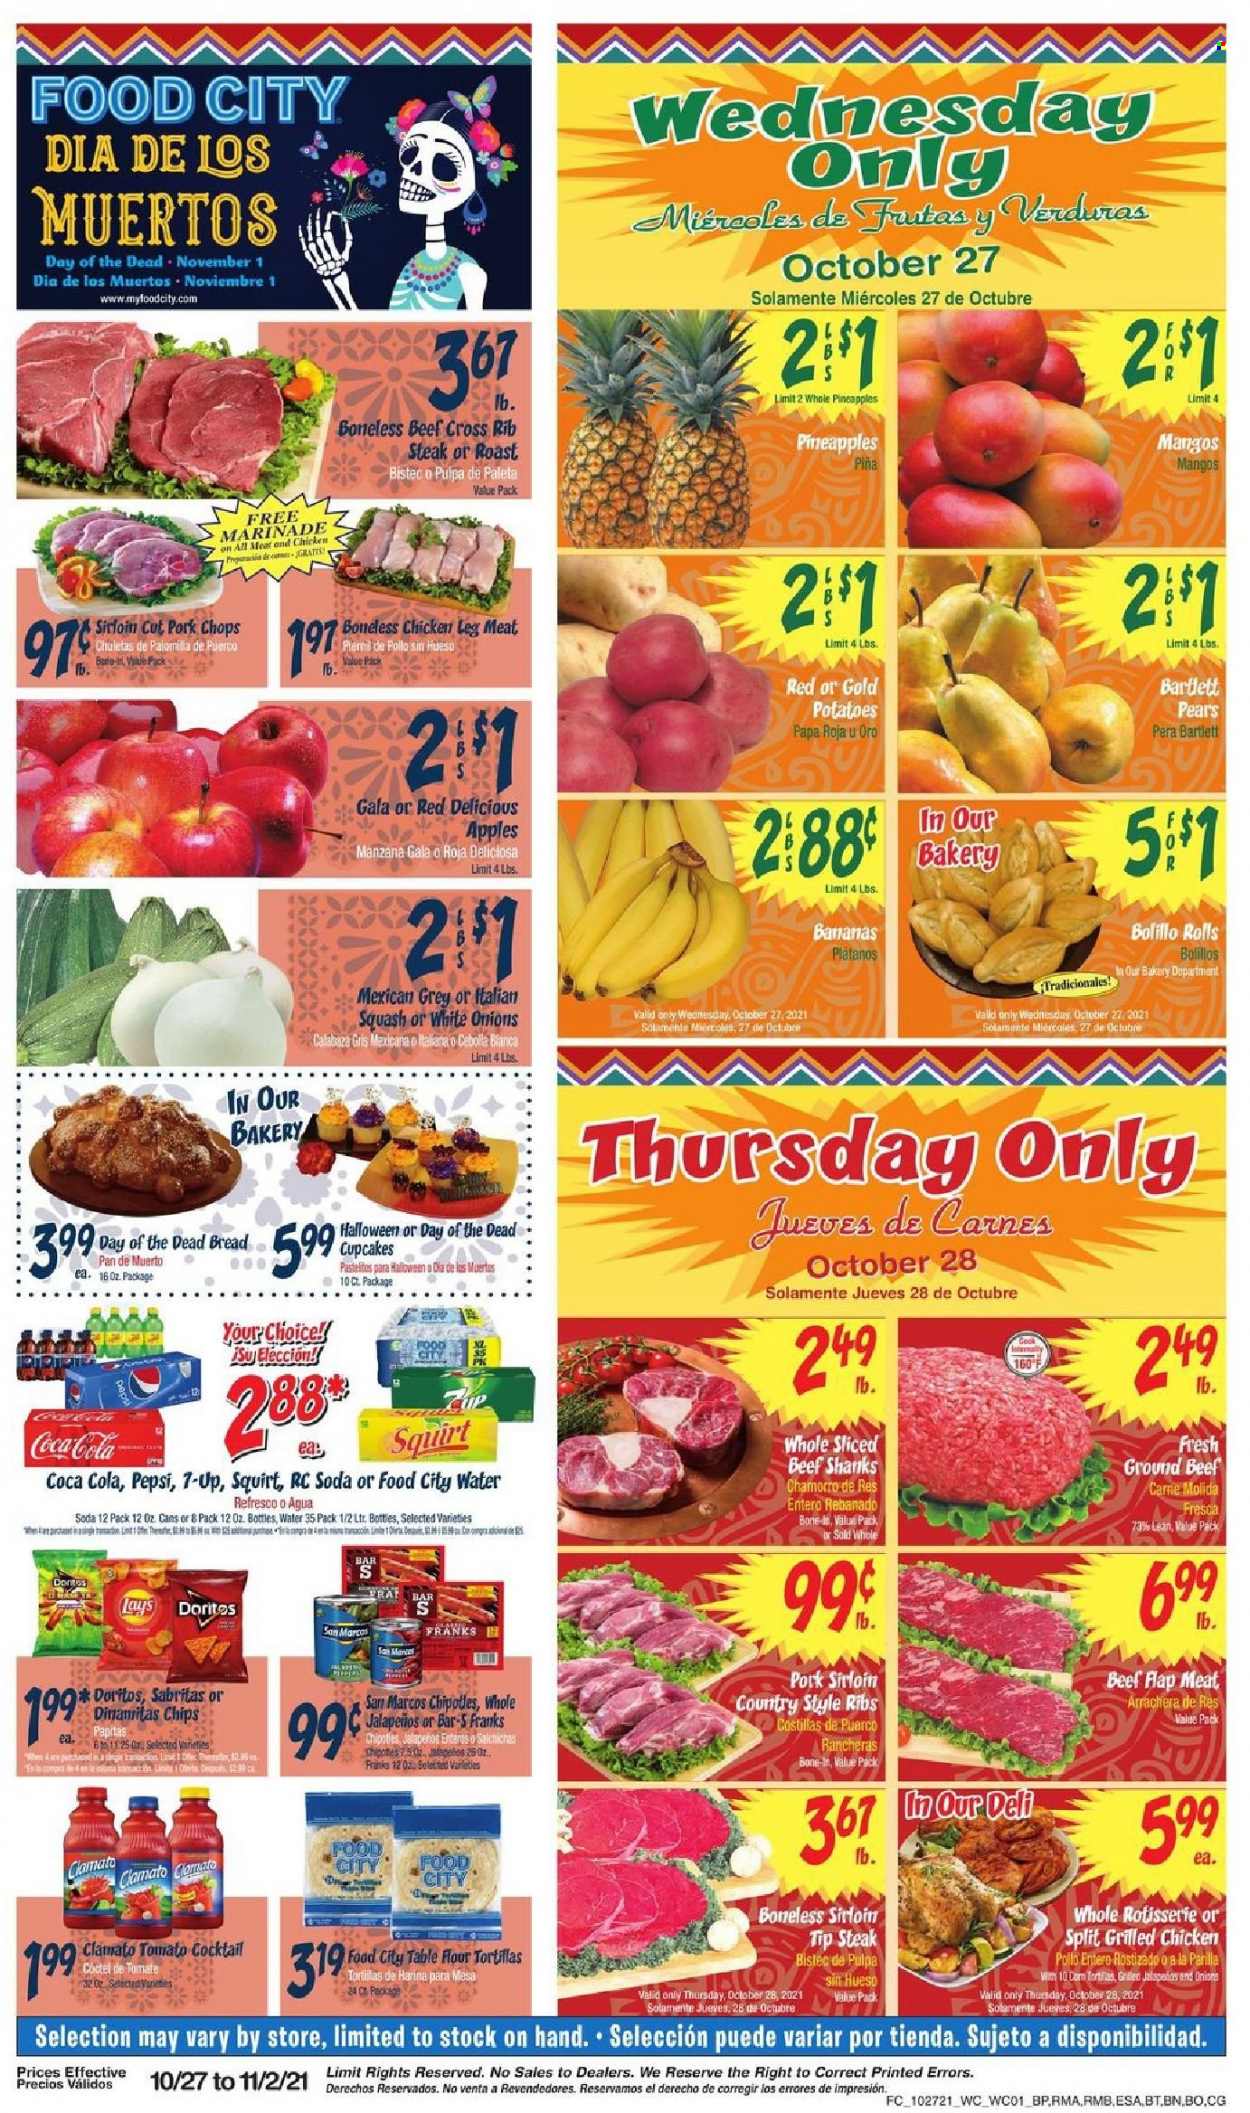 thumbnail - Food City Flyer - 10/27/2021 - 11/02/2021 - Sales products - bread, tortillas, flour tortillas, cupcake, potatoes, apples, bananas, Gala, mango, Red Delicious apples, pineapple, pears, Doritos, chips, Lay’s, marinade, Coca-Cola, Pepsi, Clamato, 7UP, soda, chicken legs, beef meat, ground beef, steak, pork chops, pork loin, pork meat, pork ribs, country style ribs. Page 1.